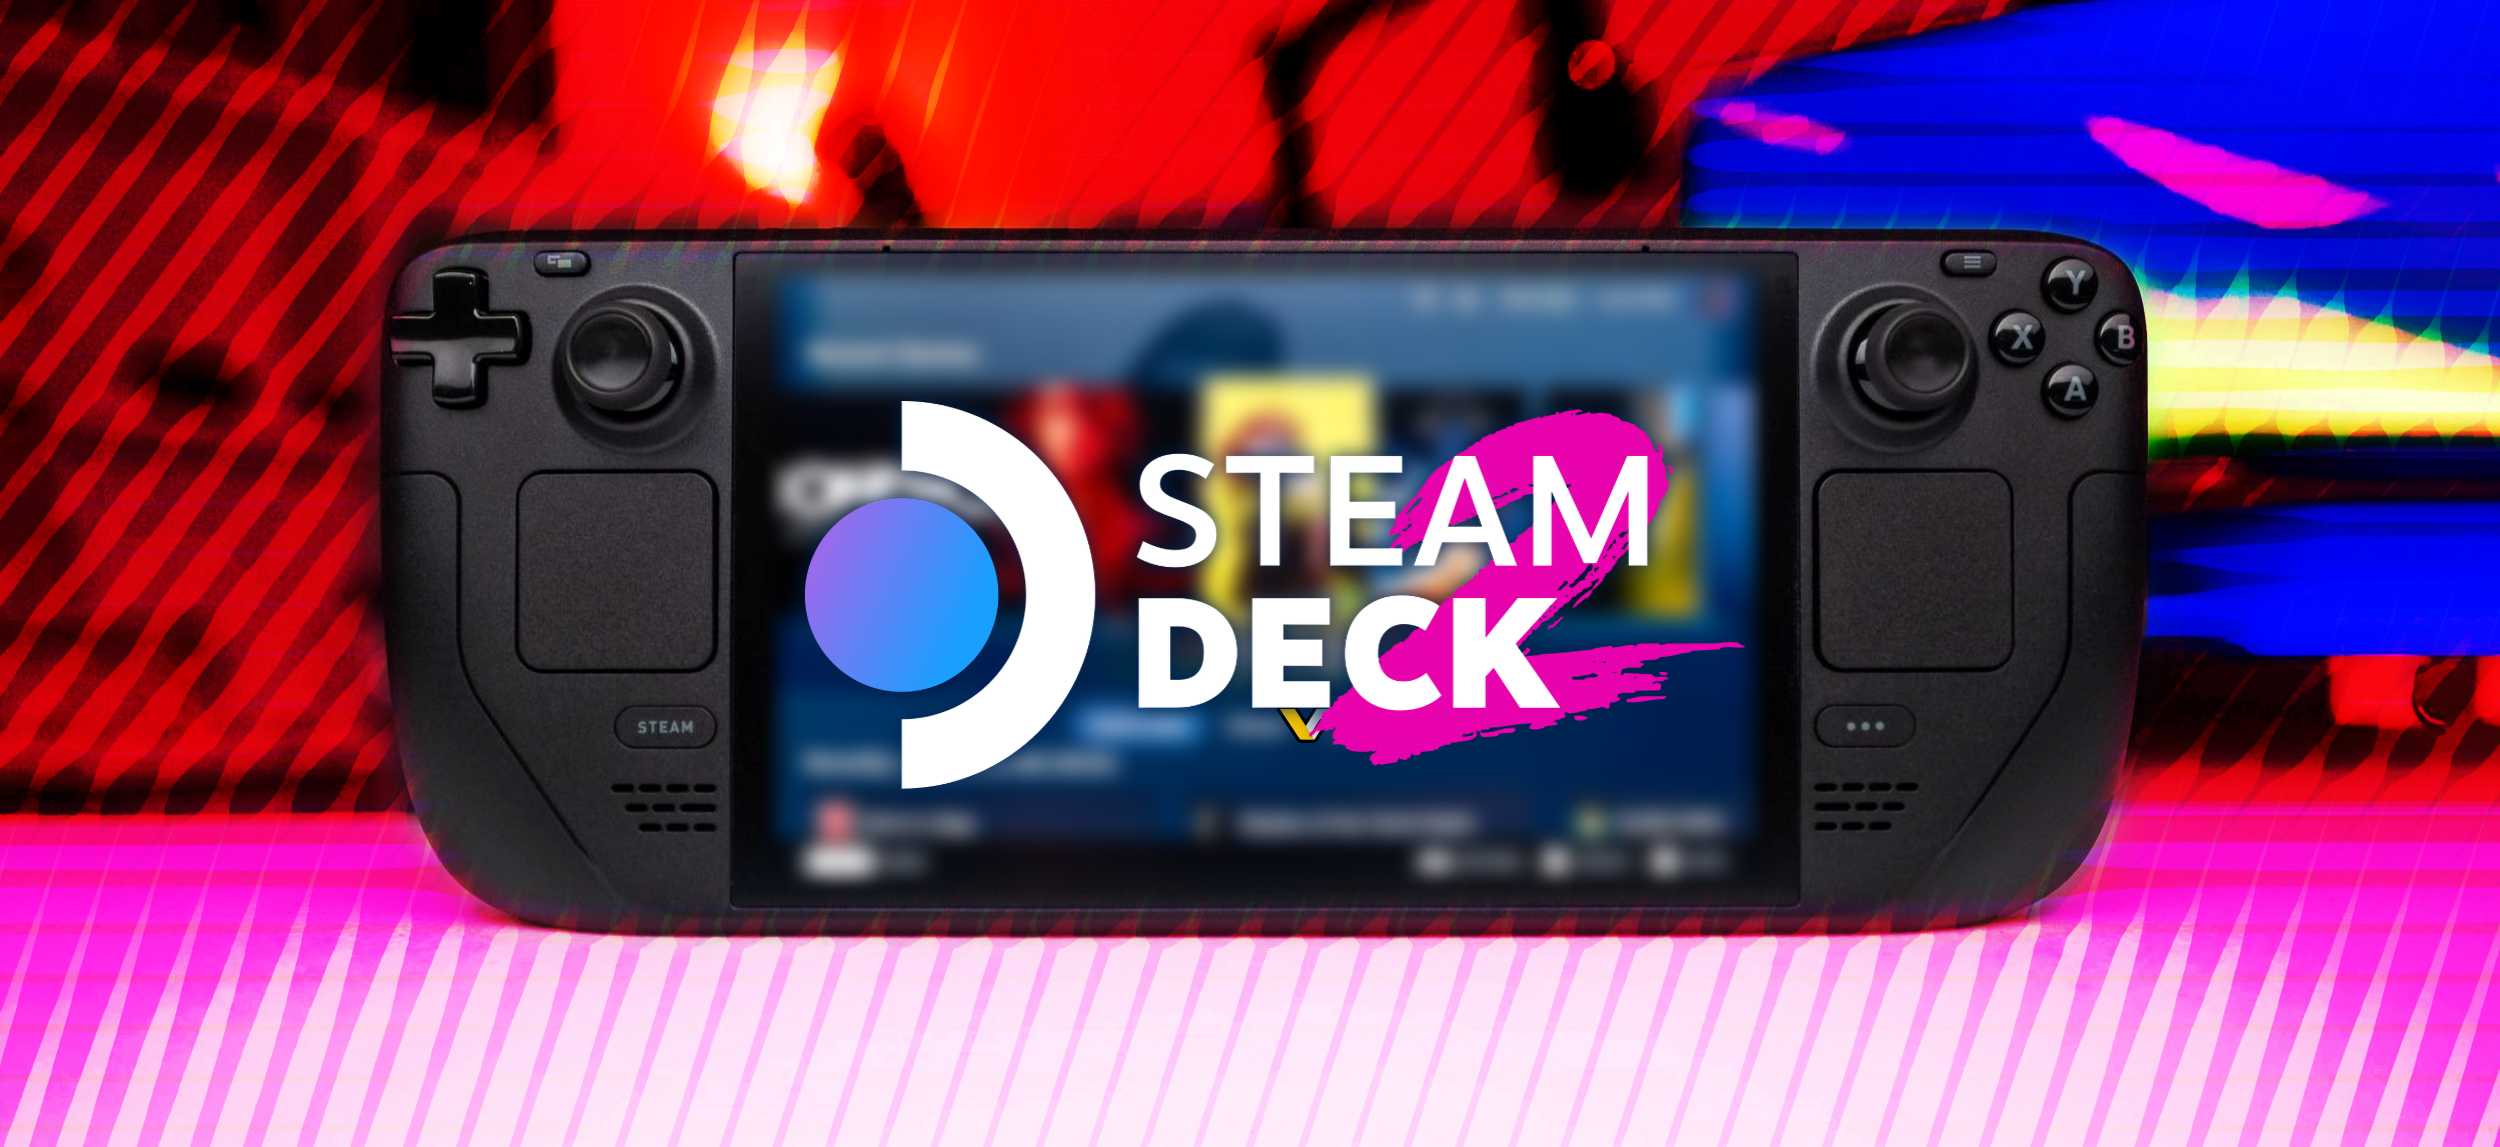 How to optimize games for the Steam Deck